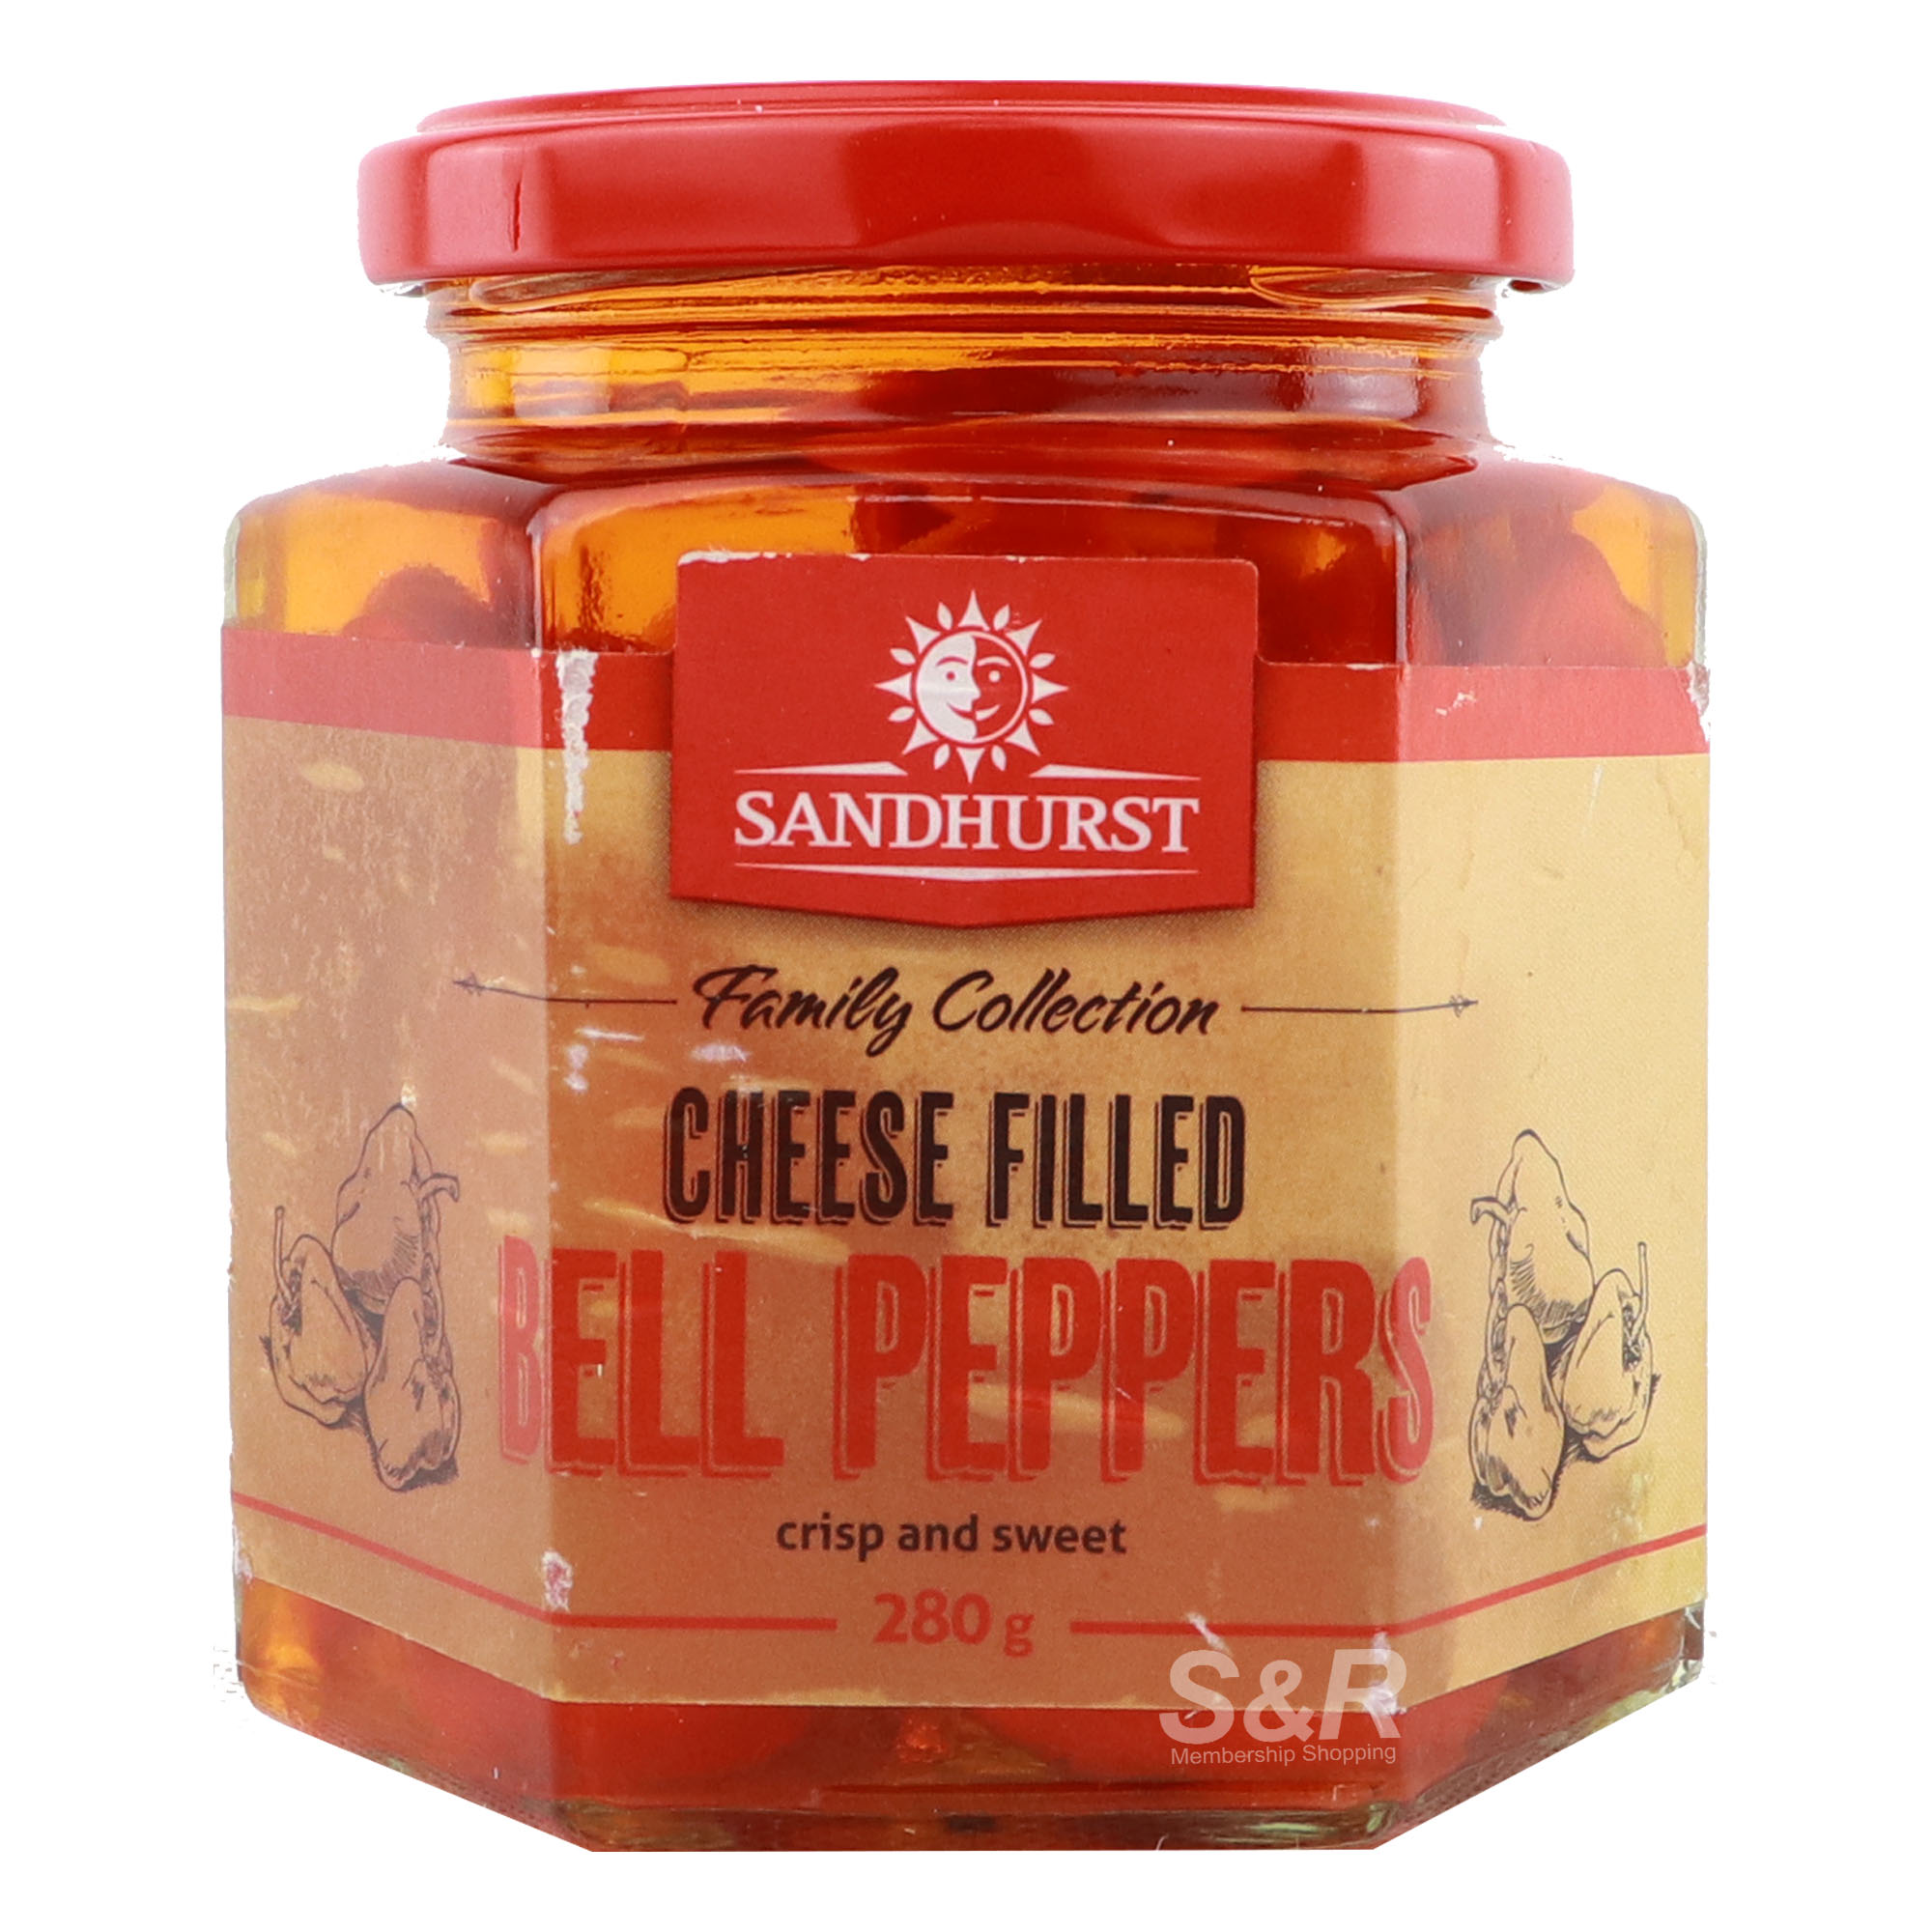 Sandhurst Family Collection Cheese-filled Bell Peppers 280g